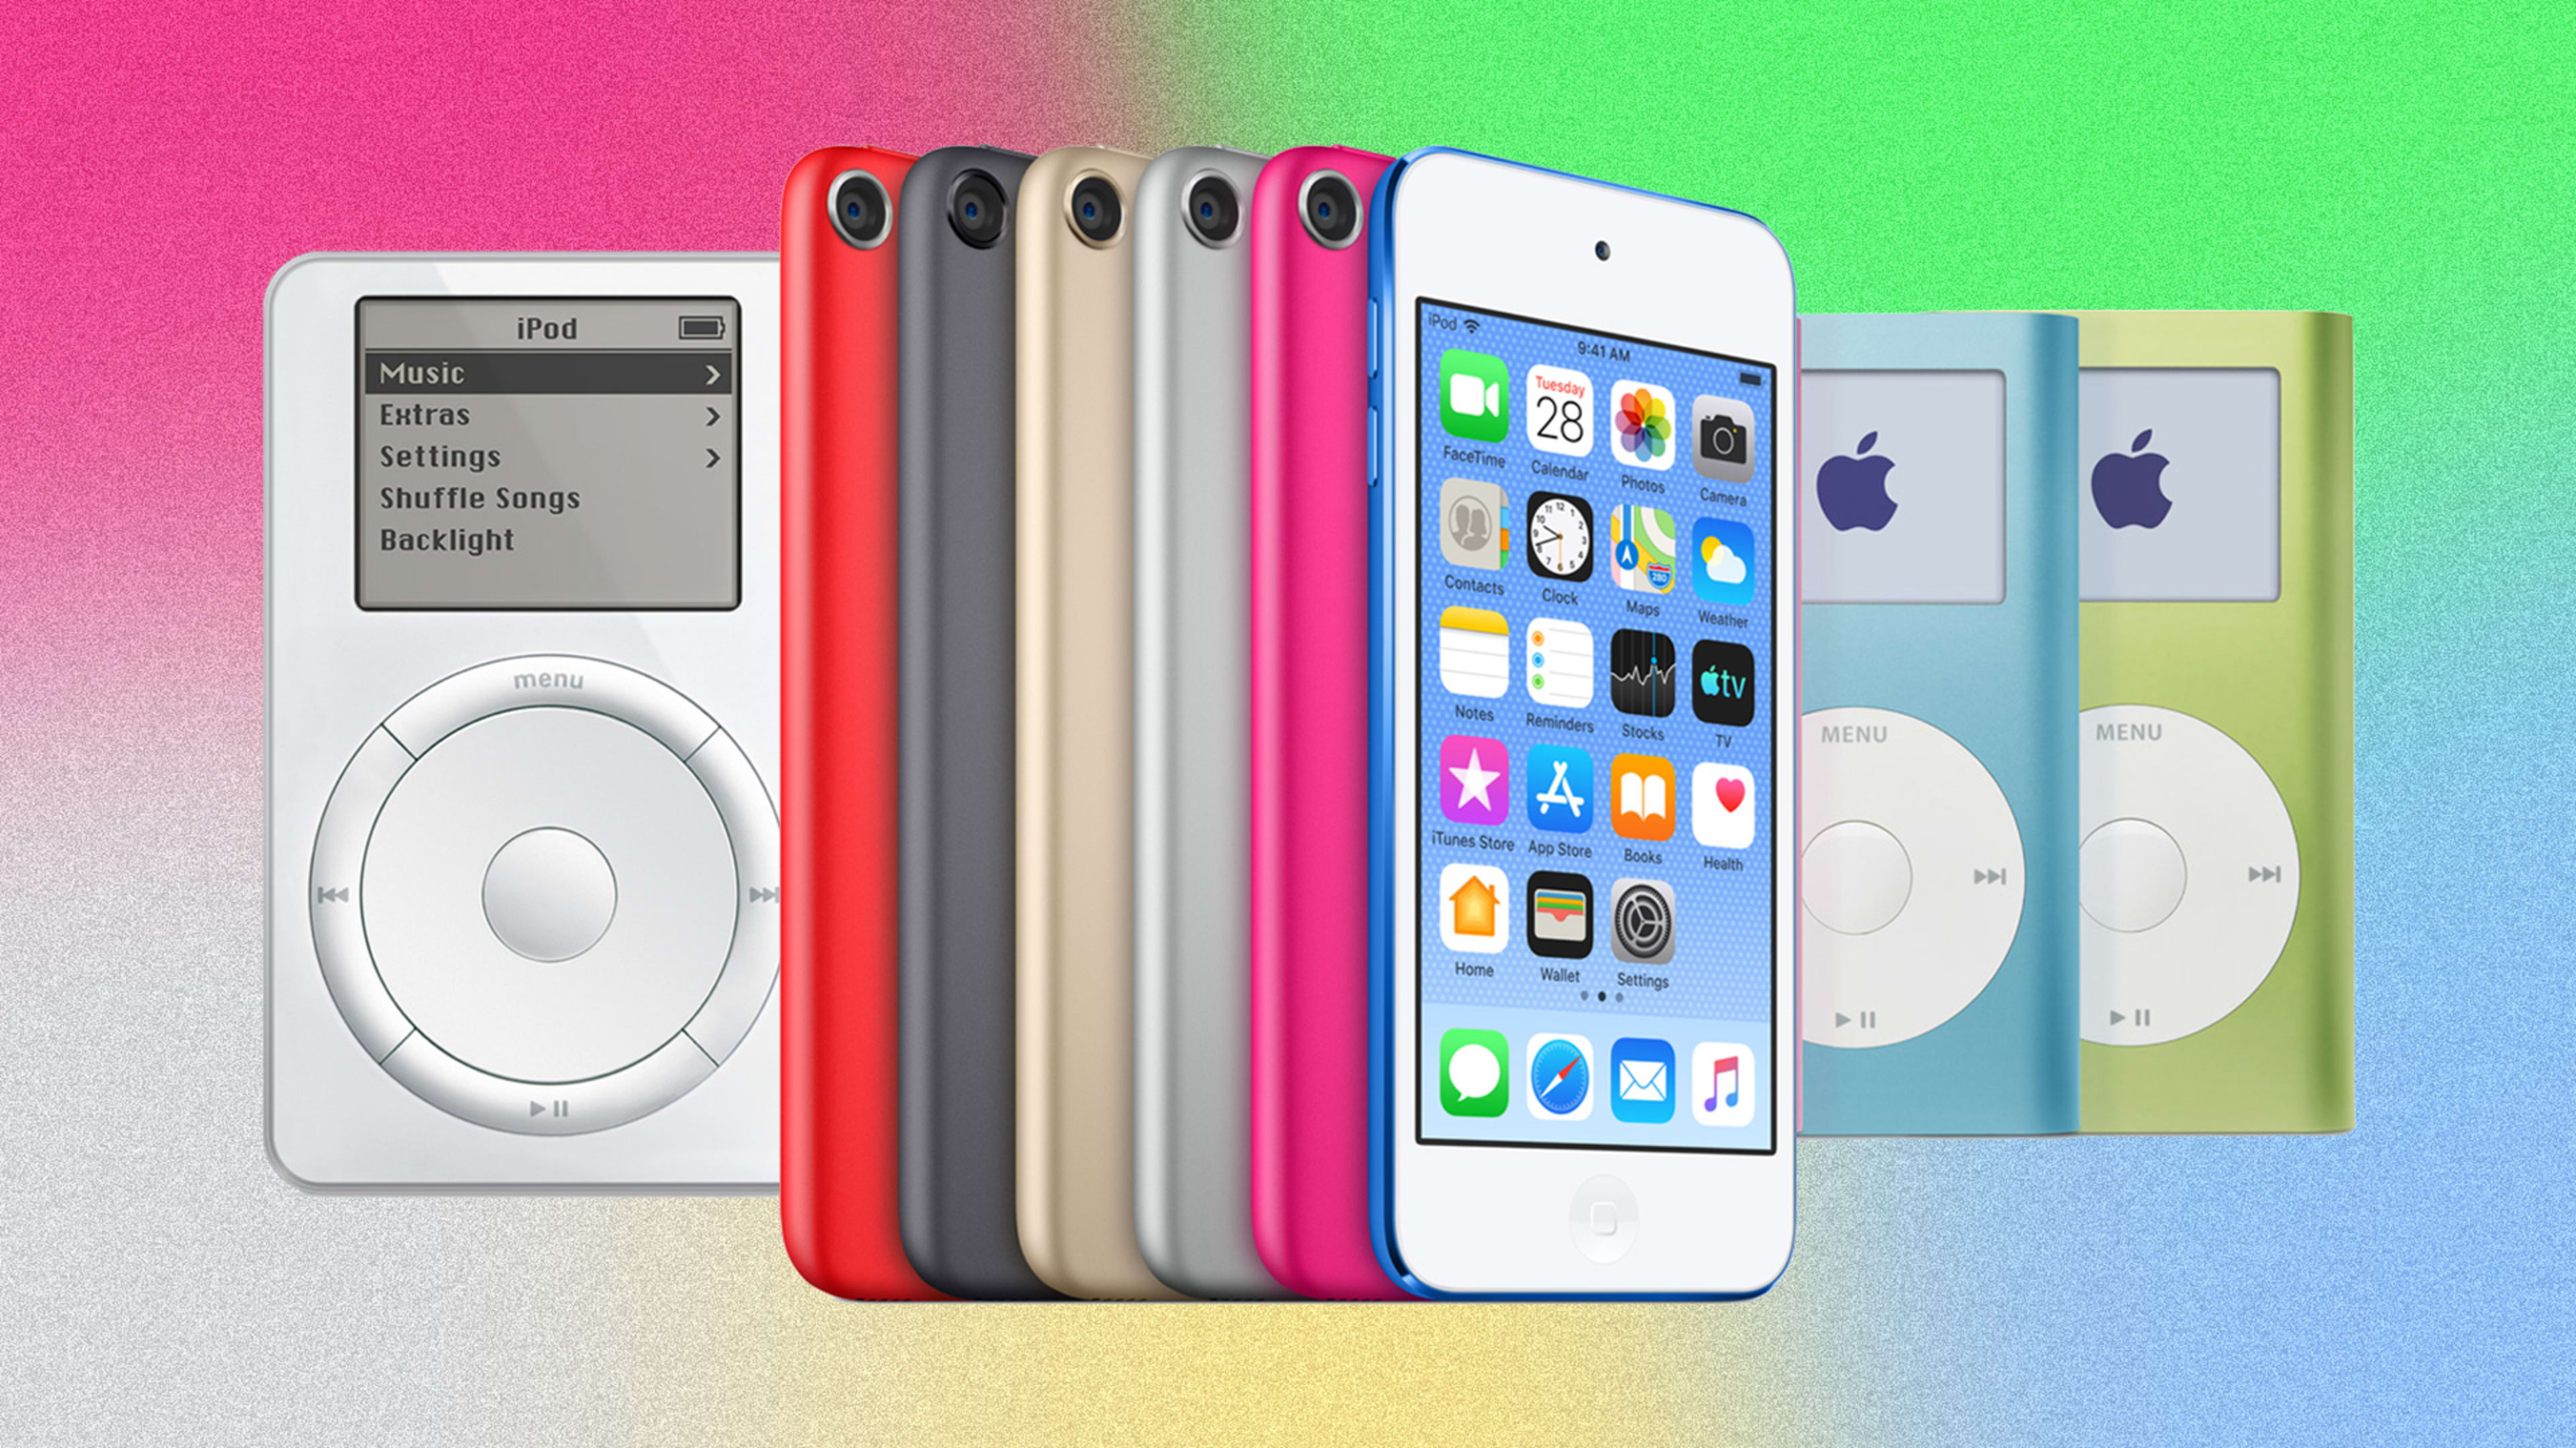 Sorry, Apple, the iPod Touch was never really an iPod